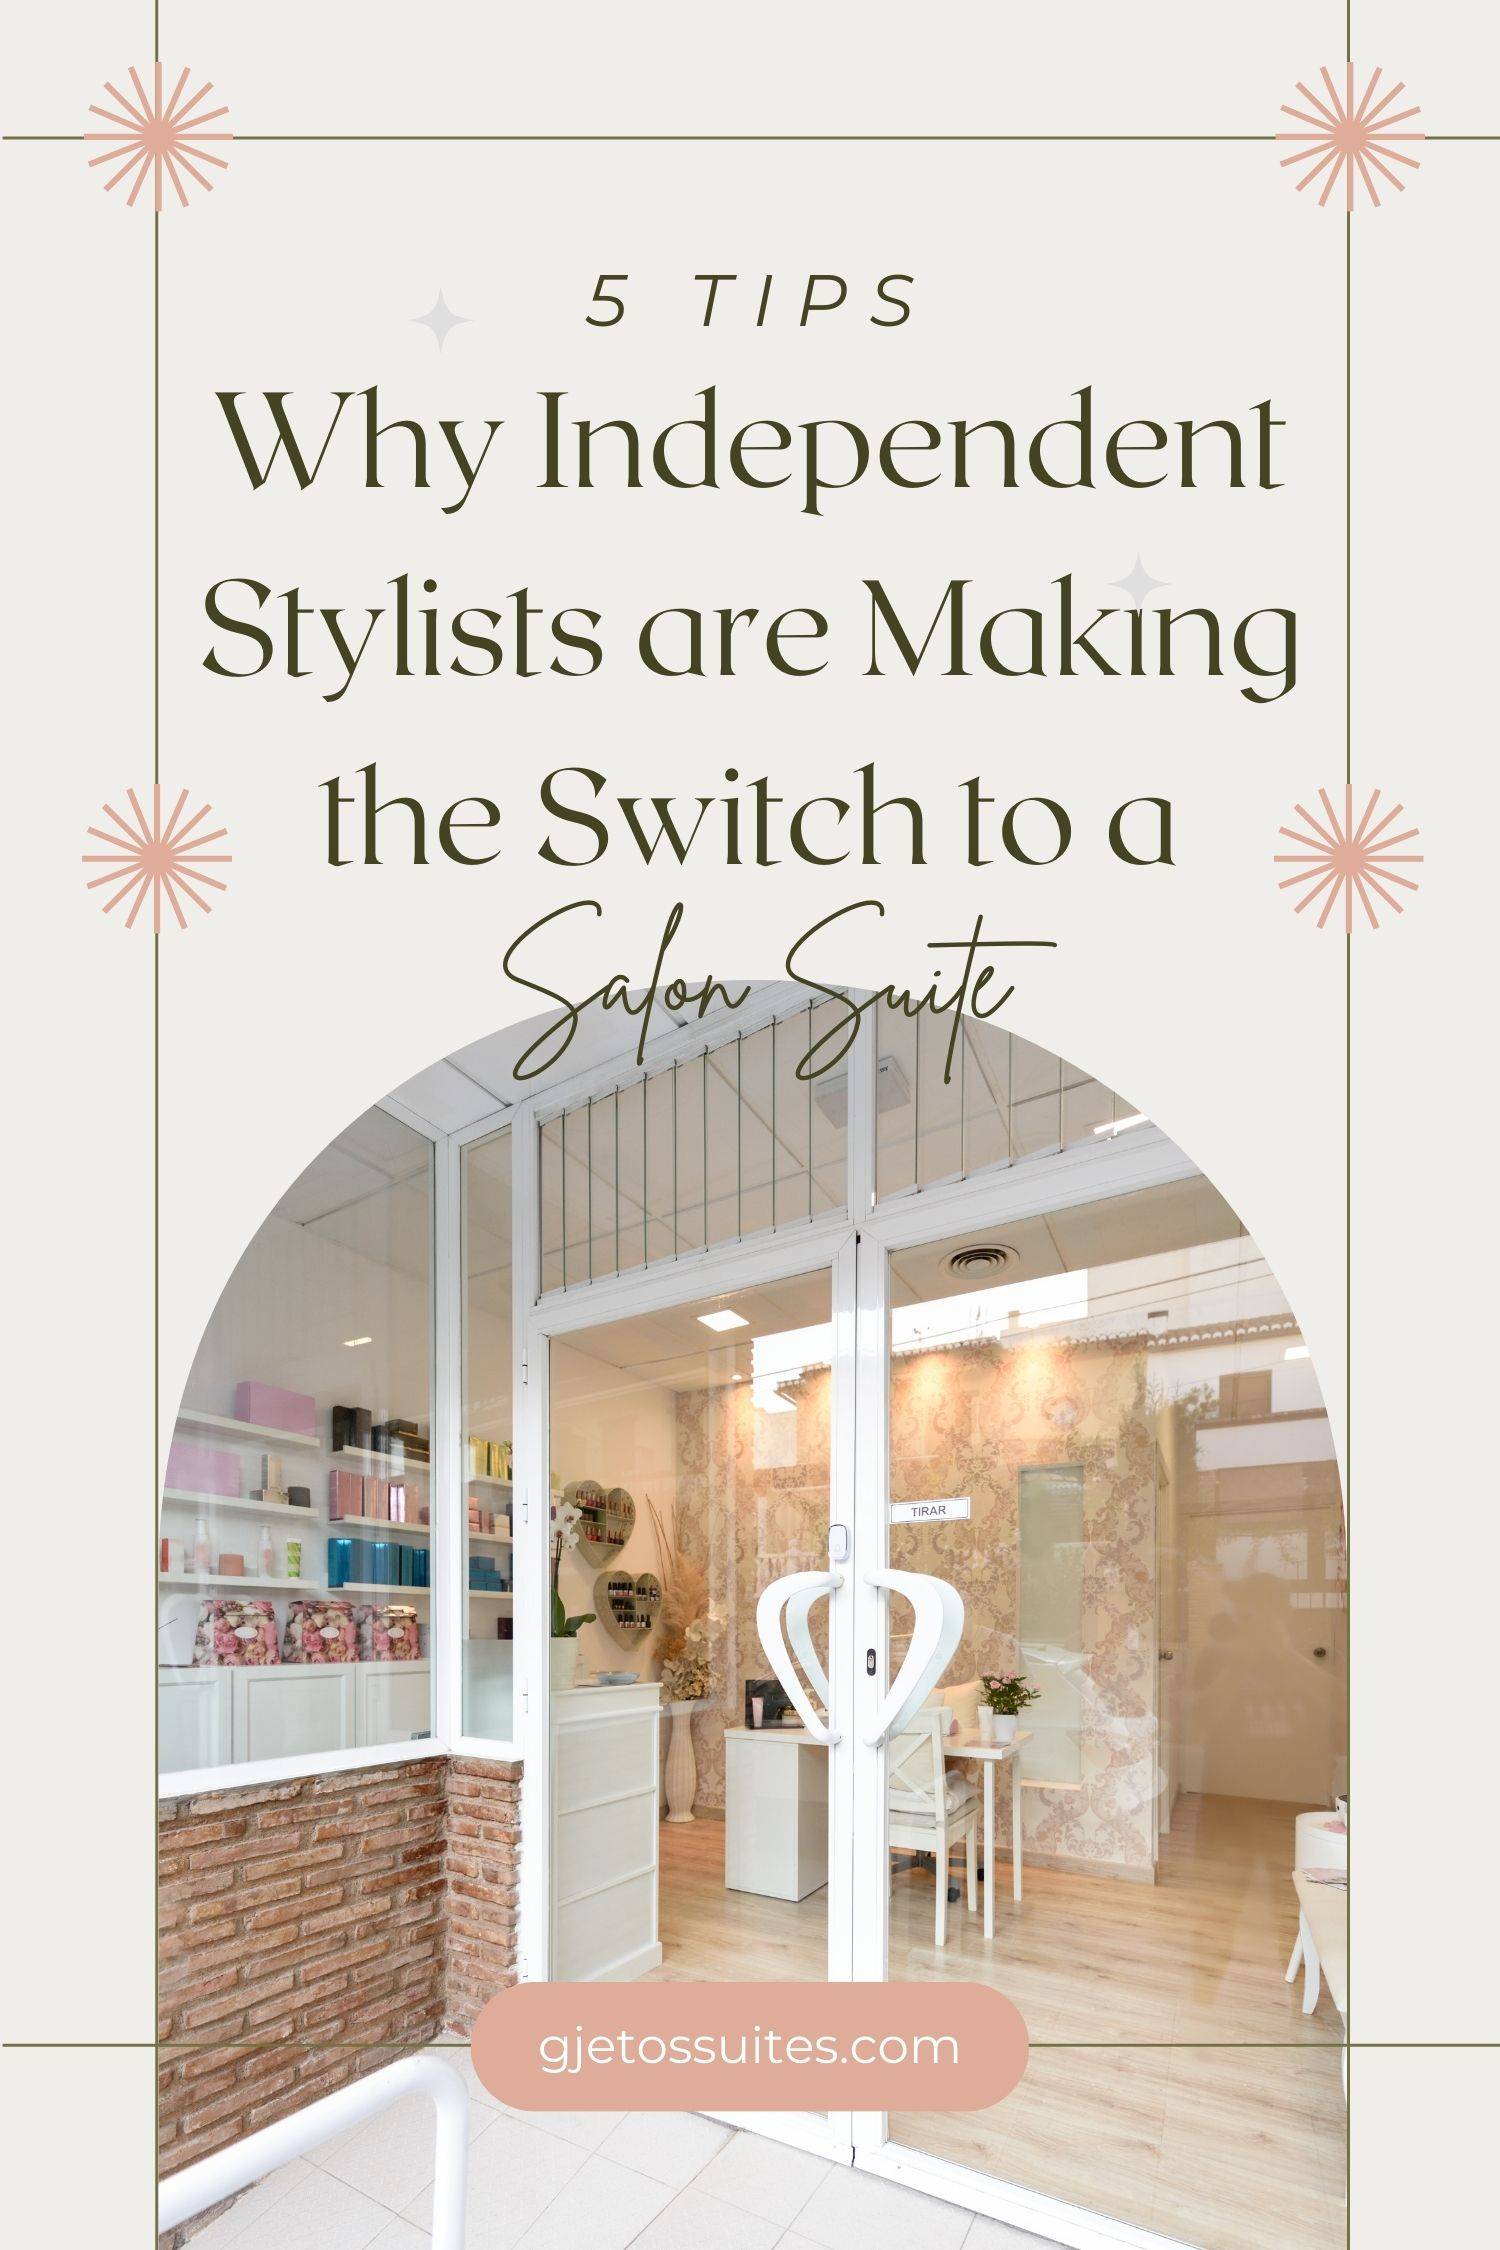 5 Reasons Why Independent Stylists are Making the Switch to a Salon Suite